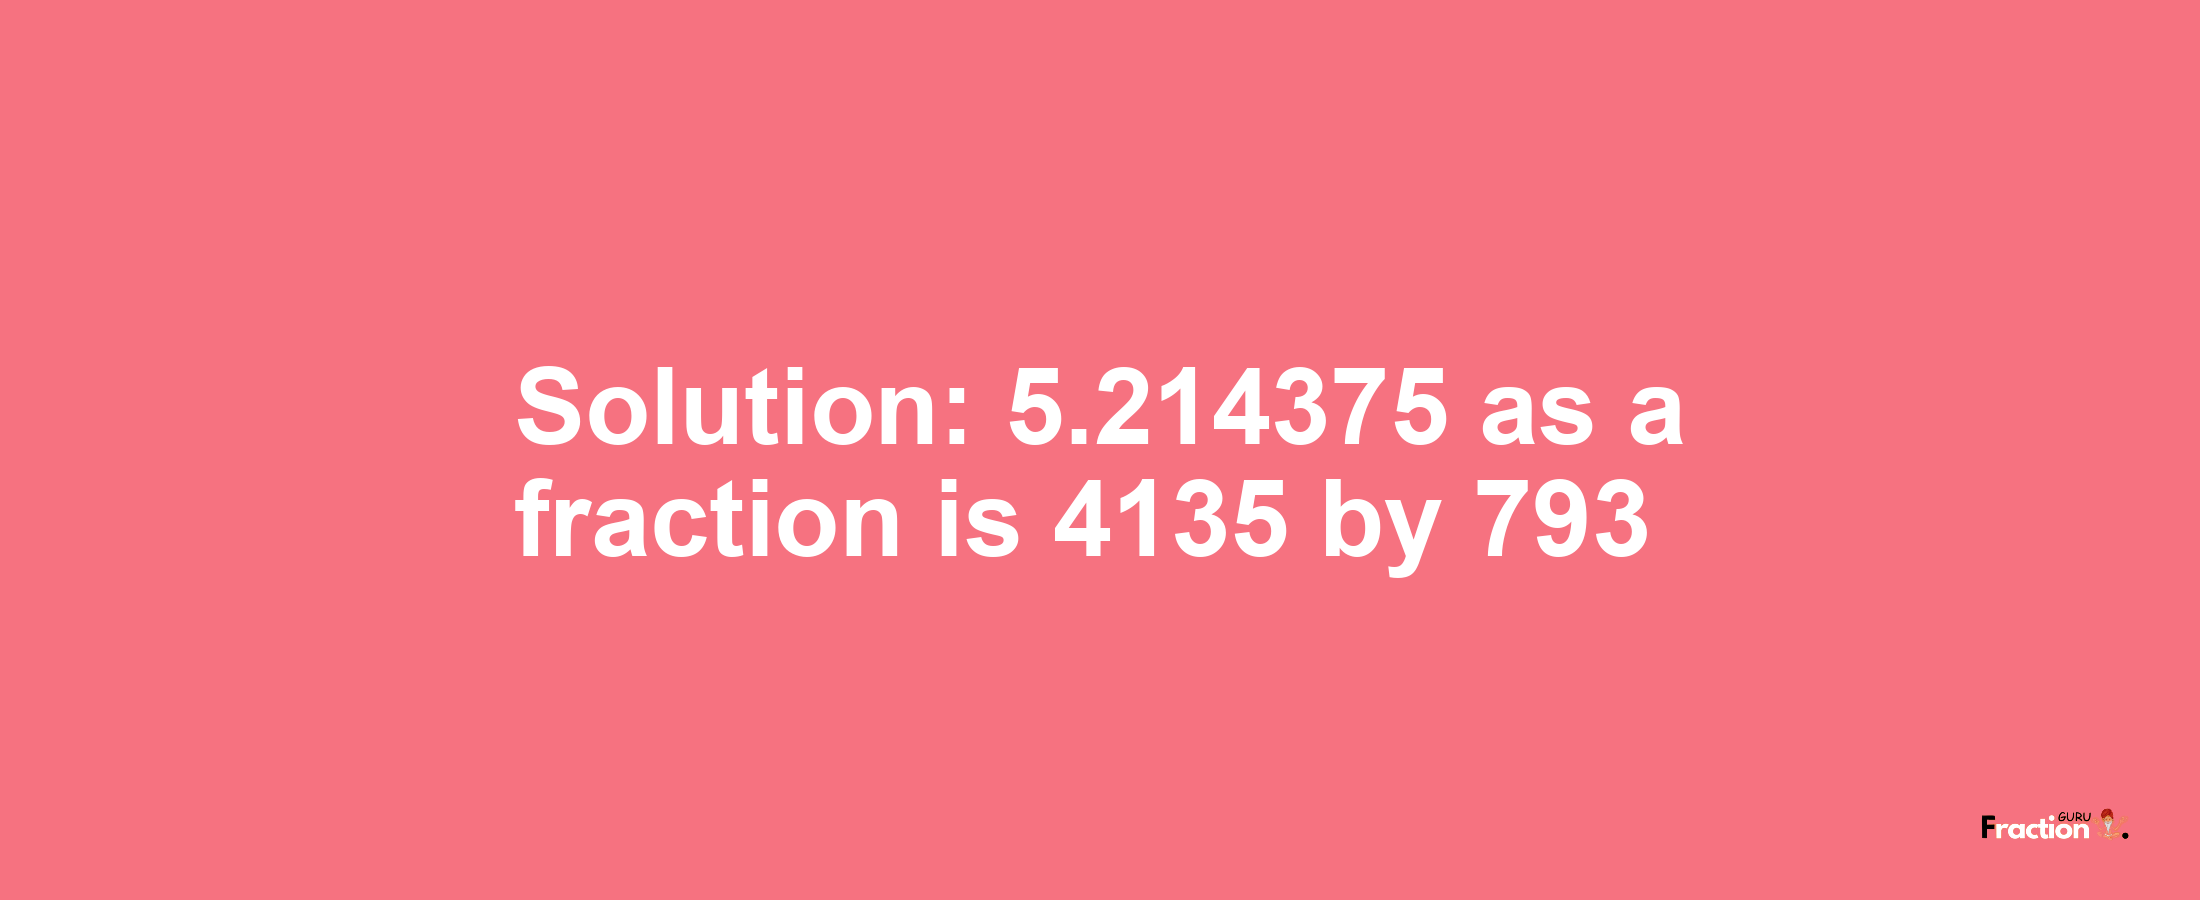 Solution:5.214375 as a fraction is 4135/793